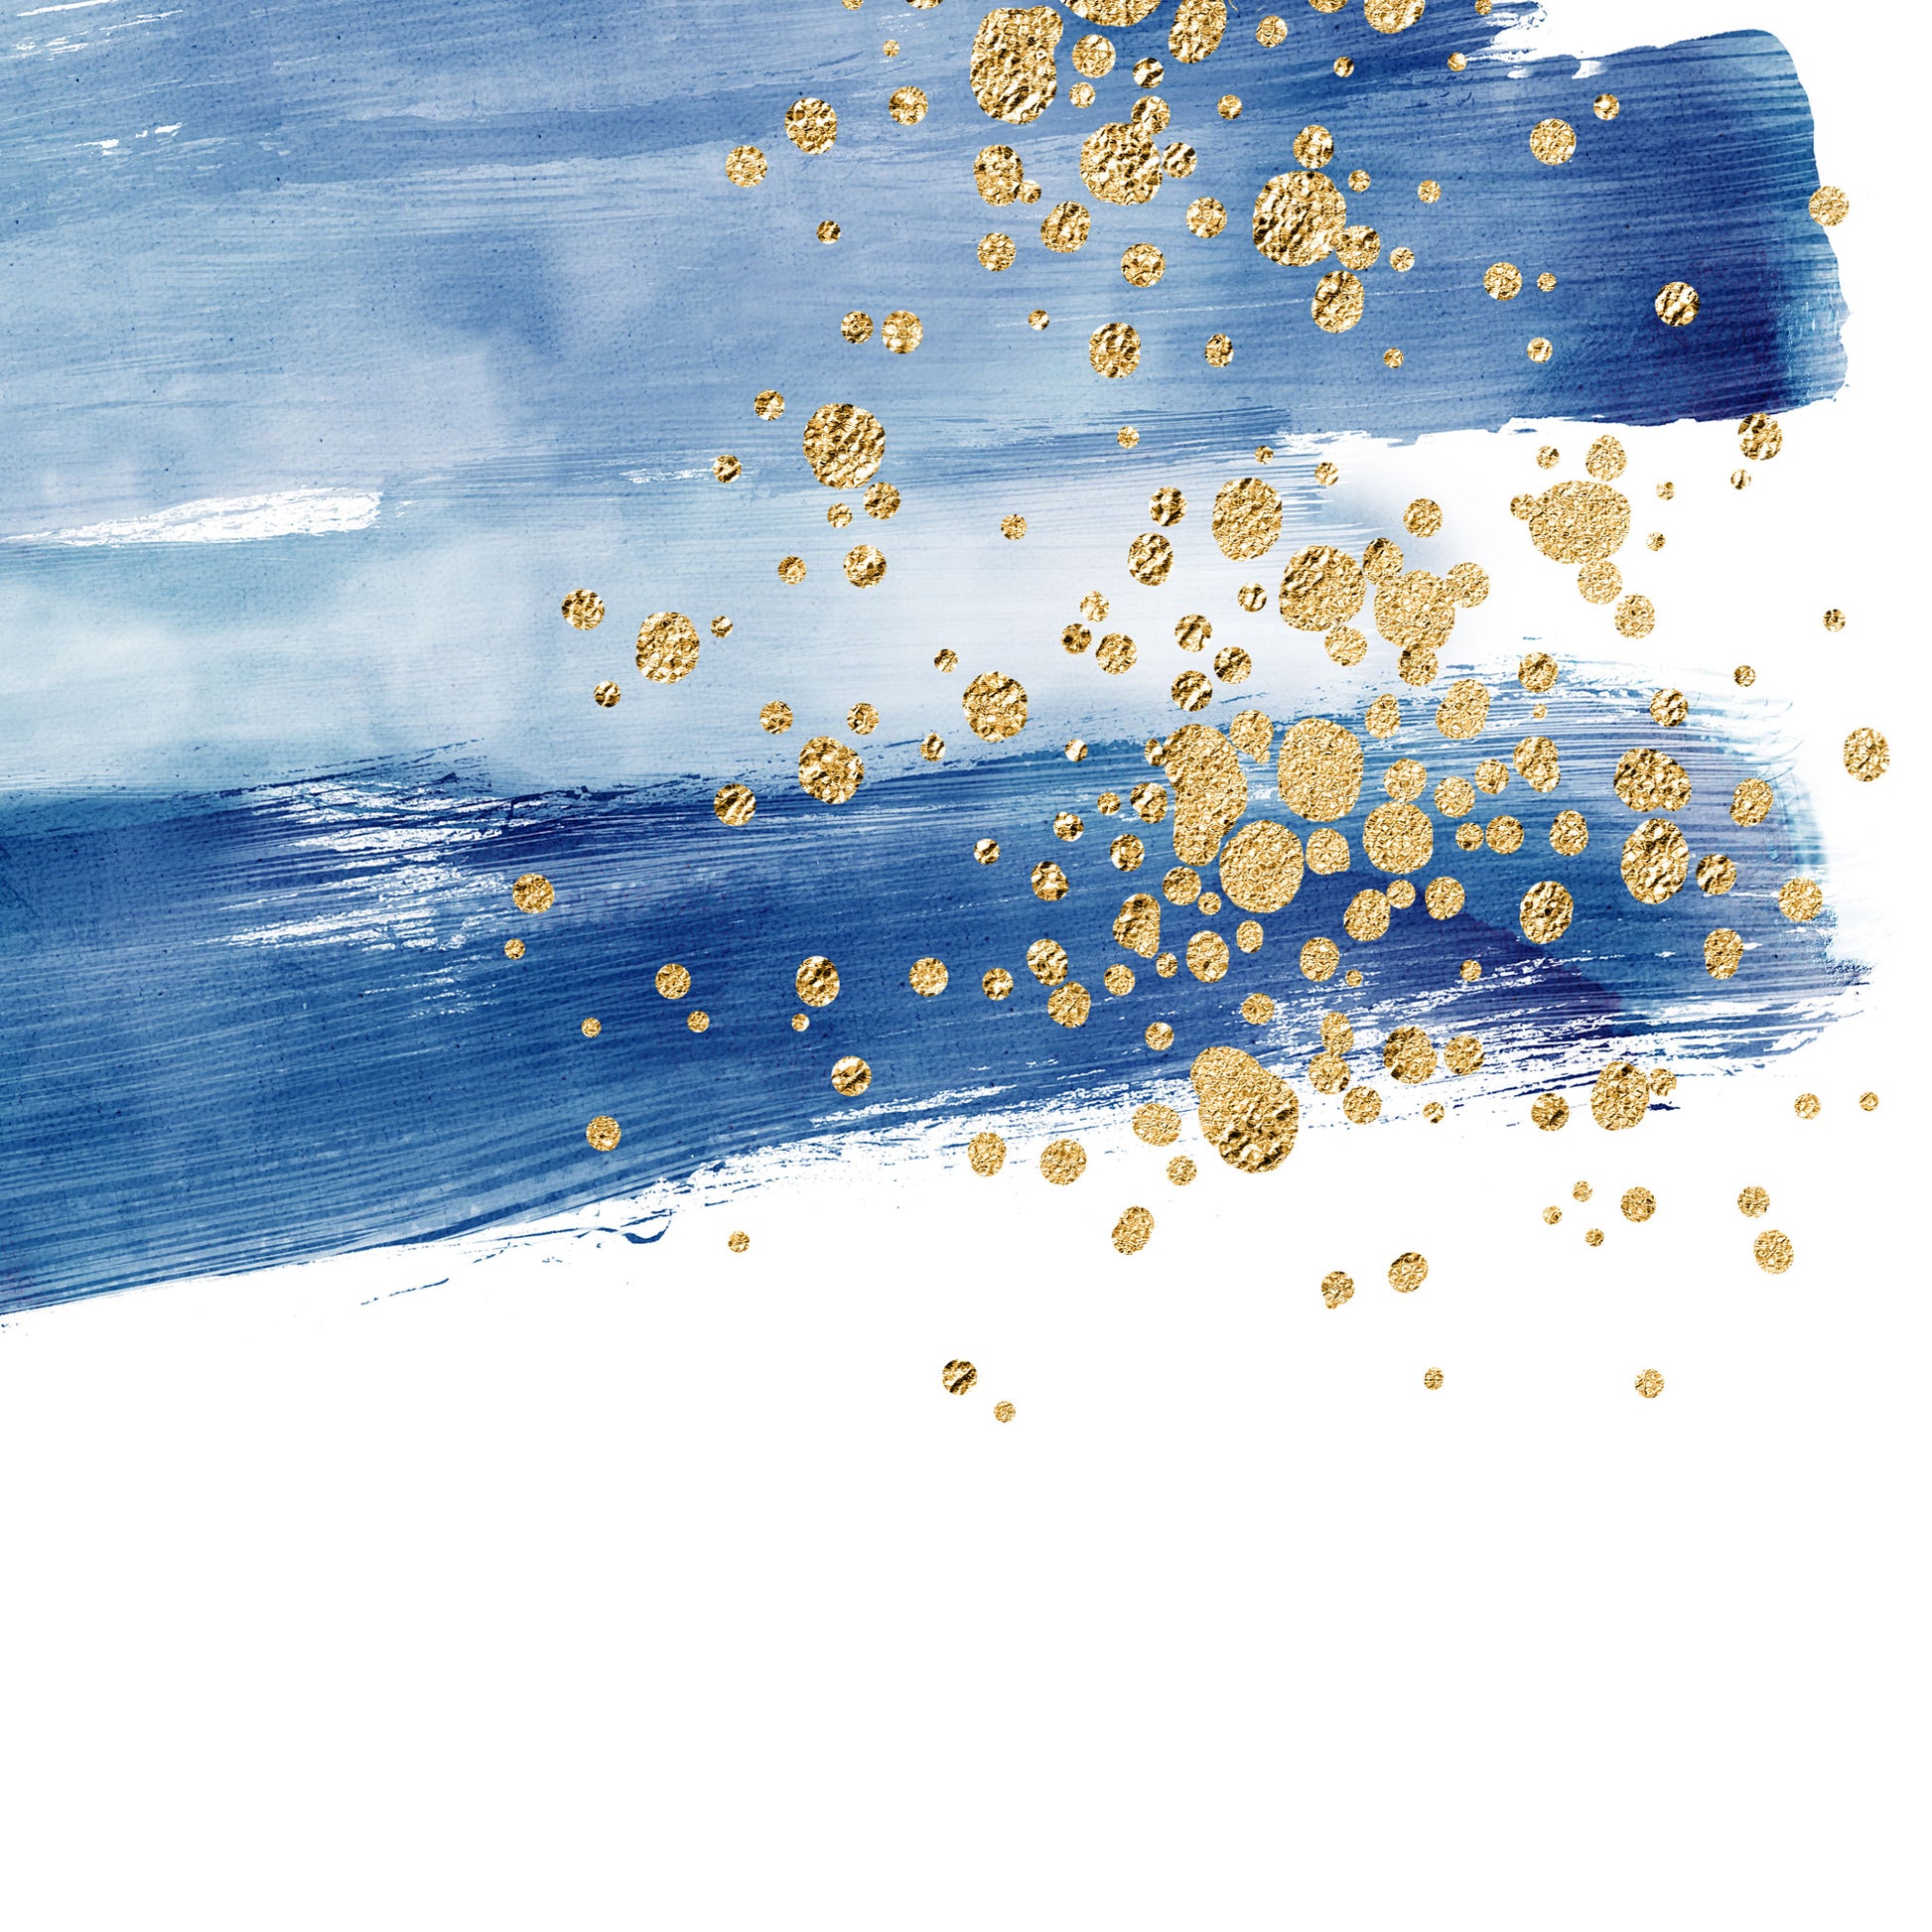 Blue Brushstrokes and Gold Splatter Up Close